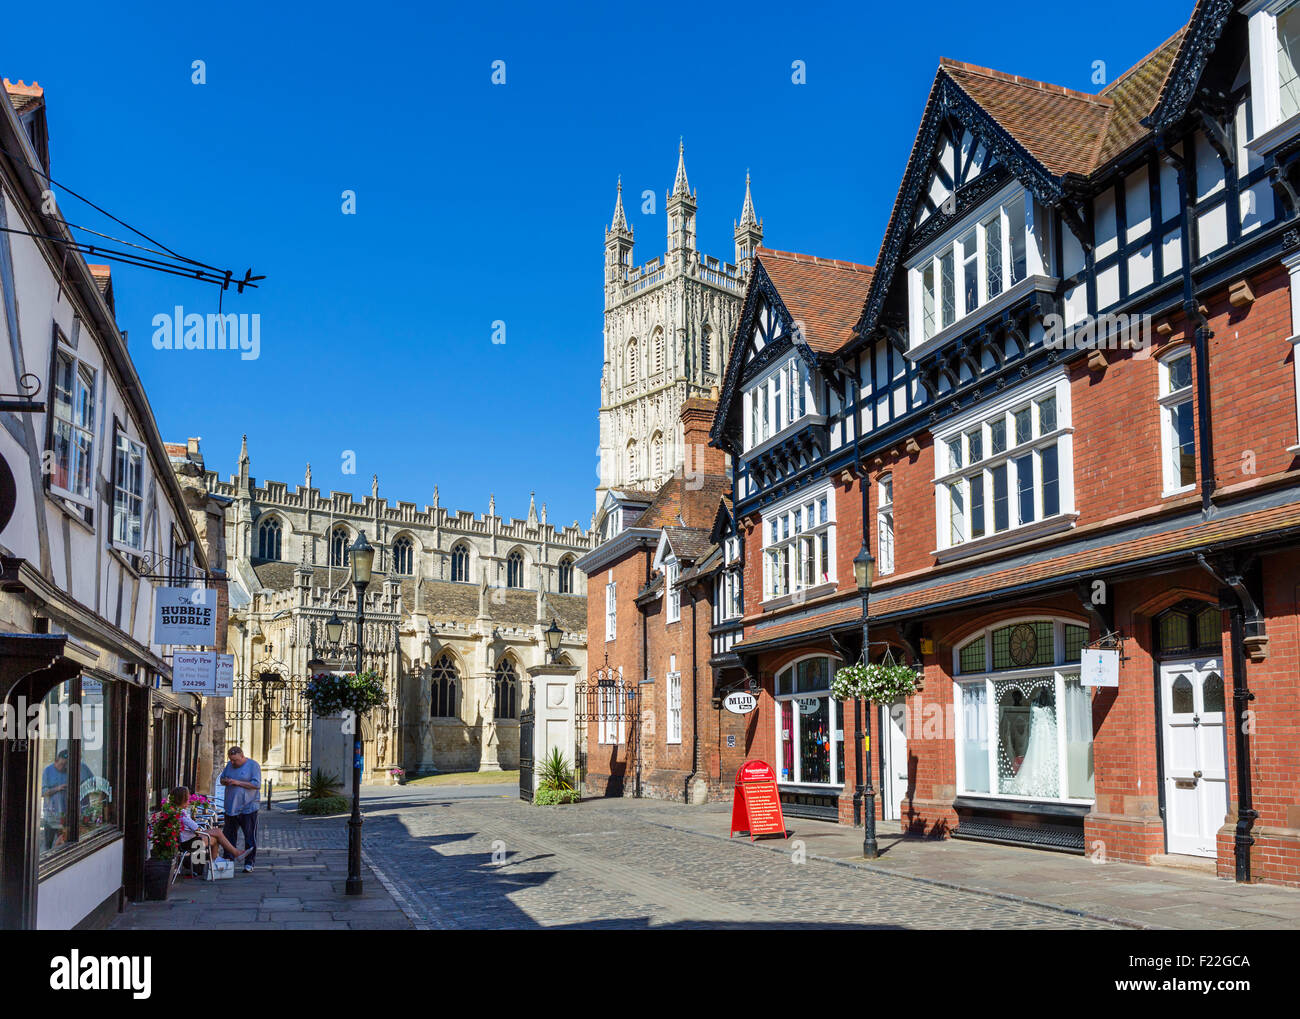 College Street looking towards Gloucester Cathedral, Gloucester, Gloucestershire, England, UK Stock Photo